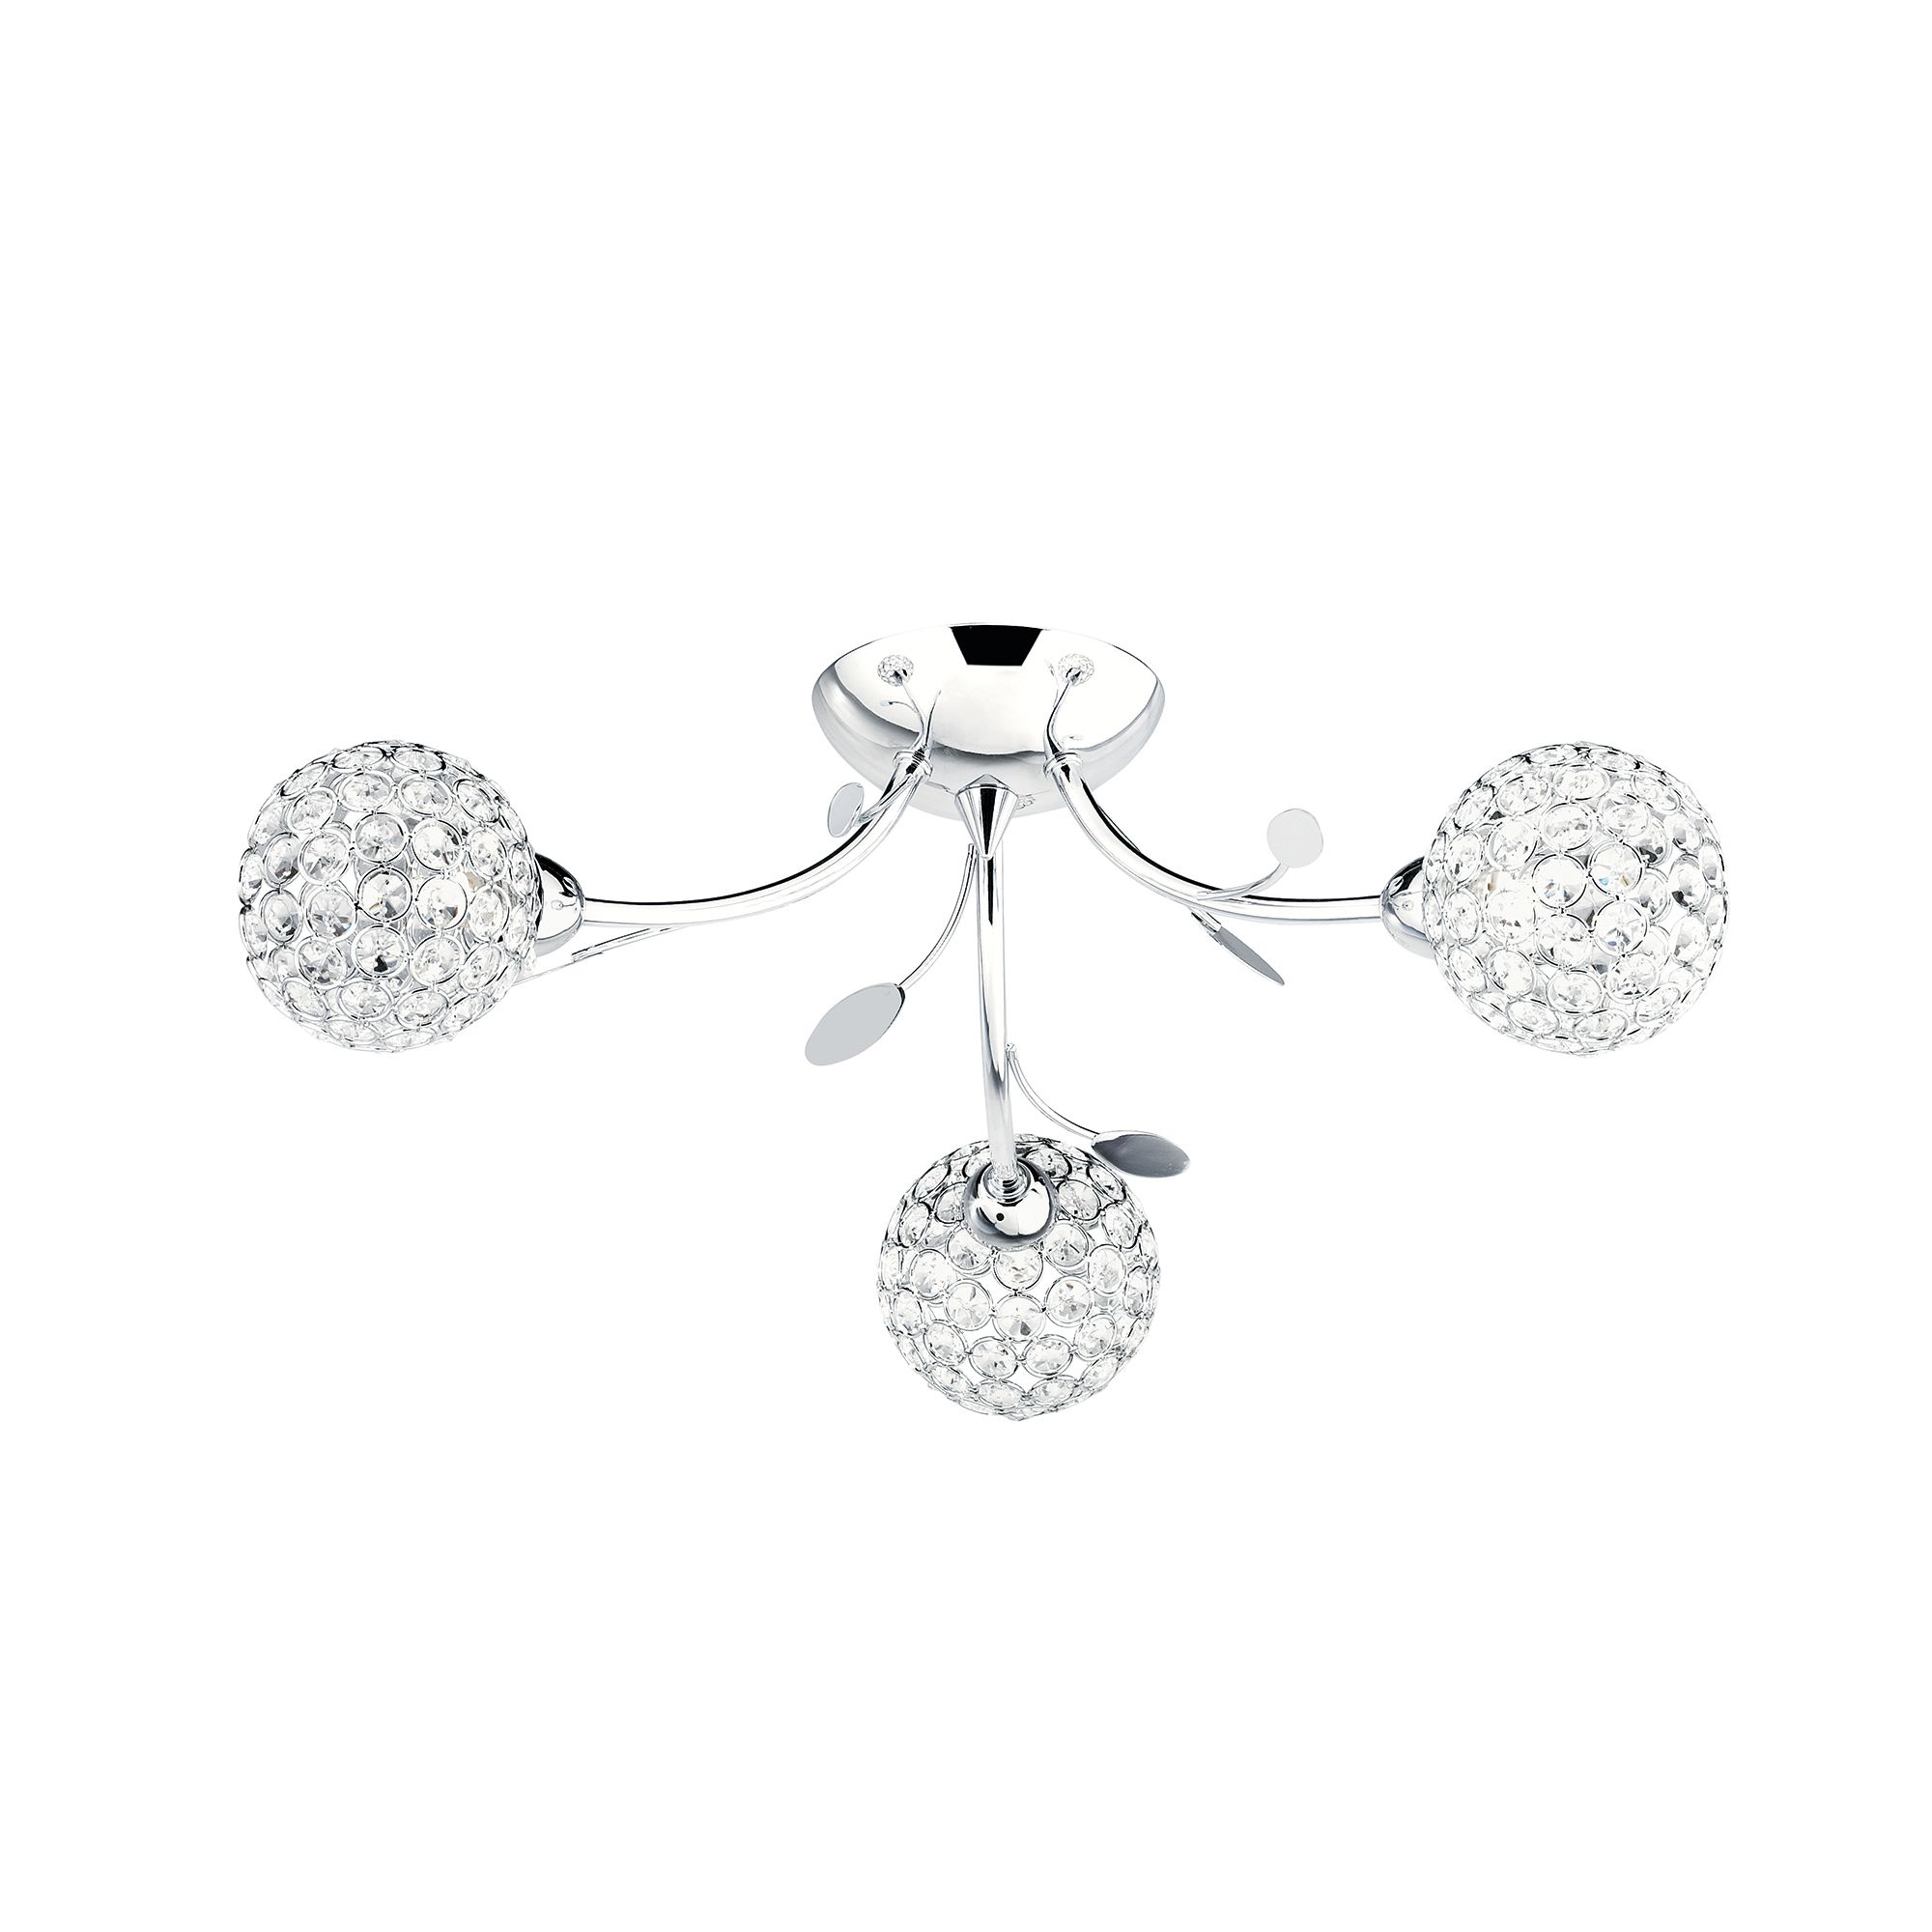 Bellis II 3 Light Ceiling Fitting with Clear Glass Metal Shades